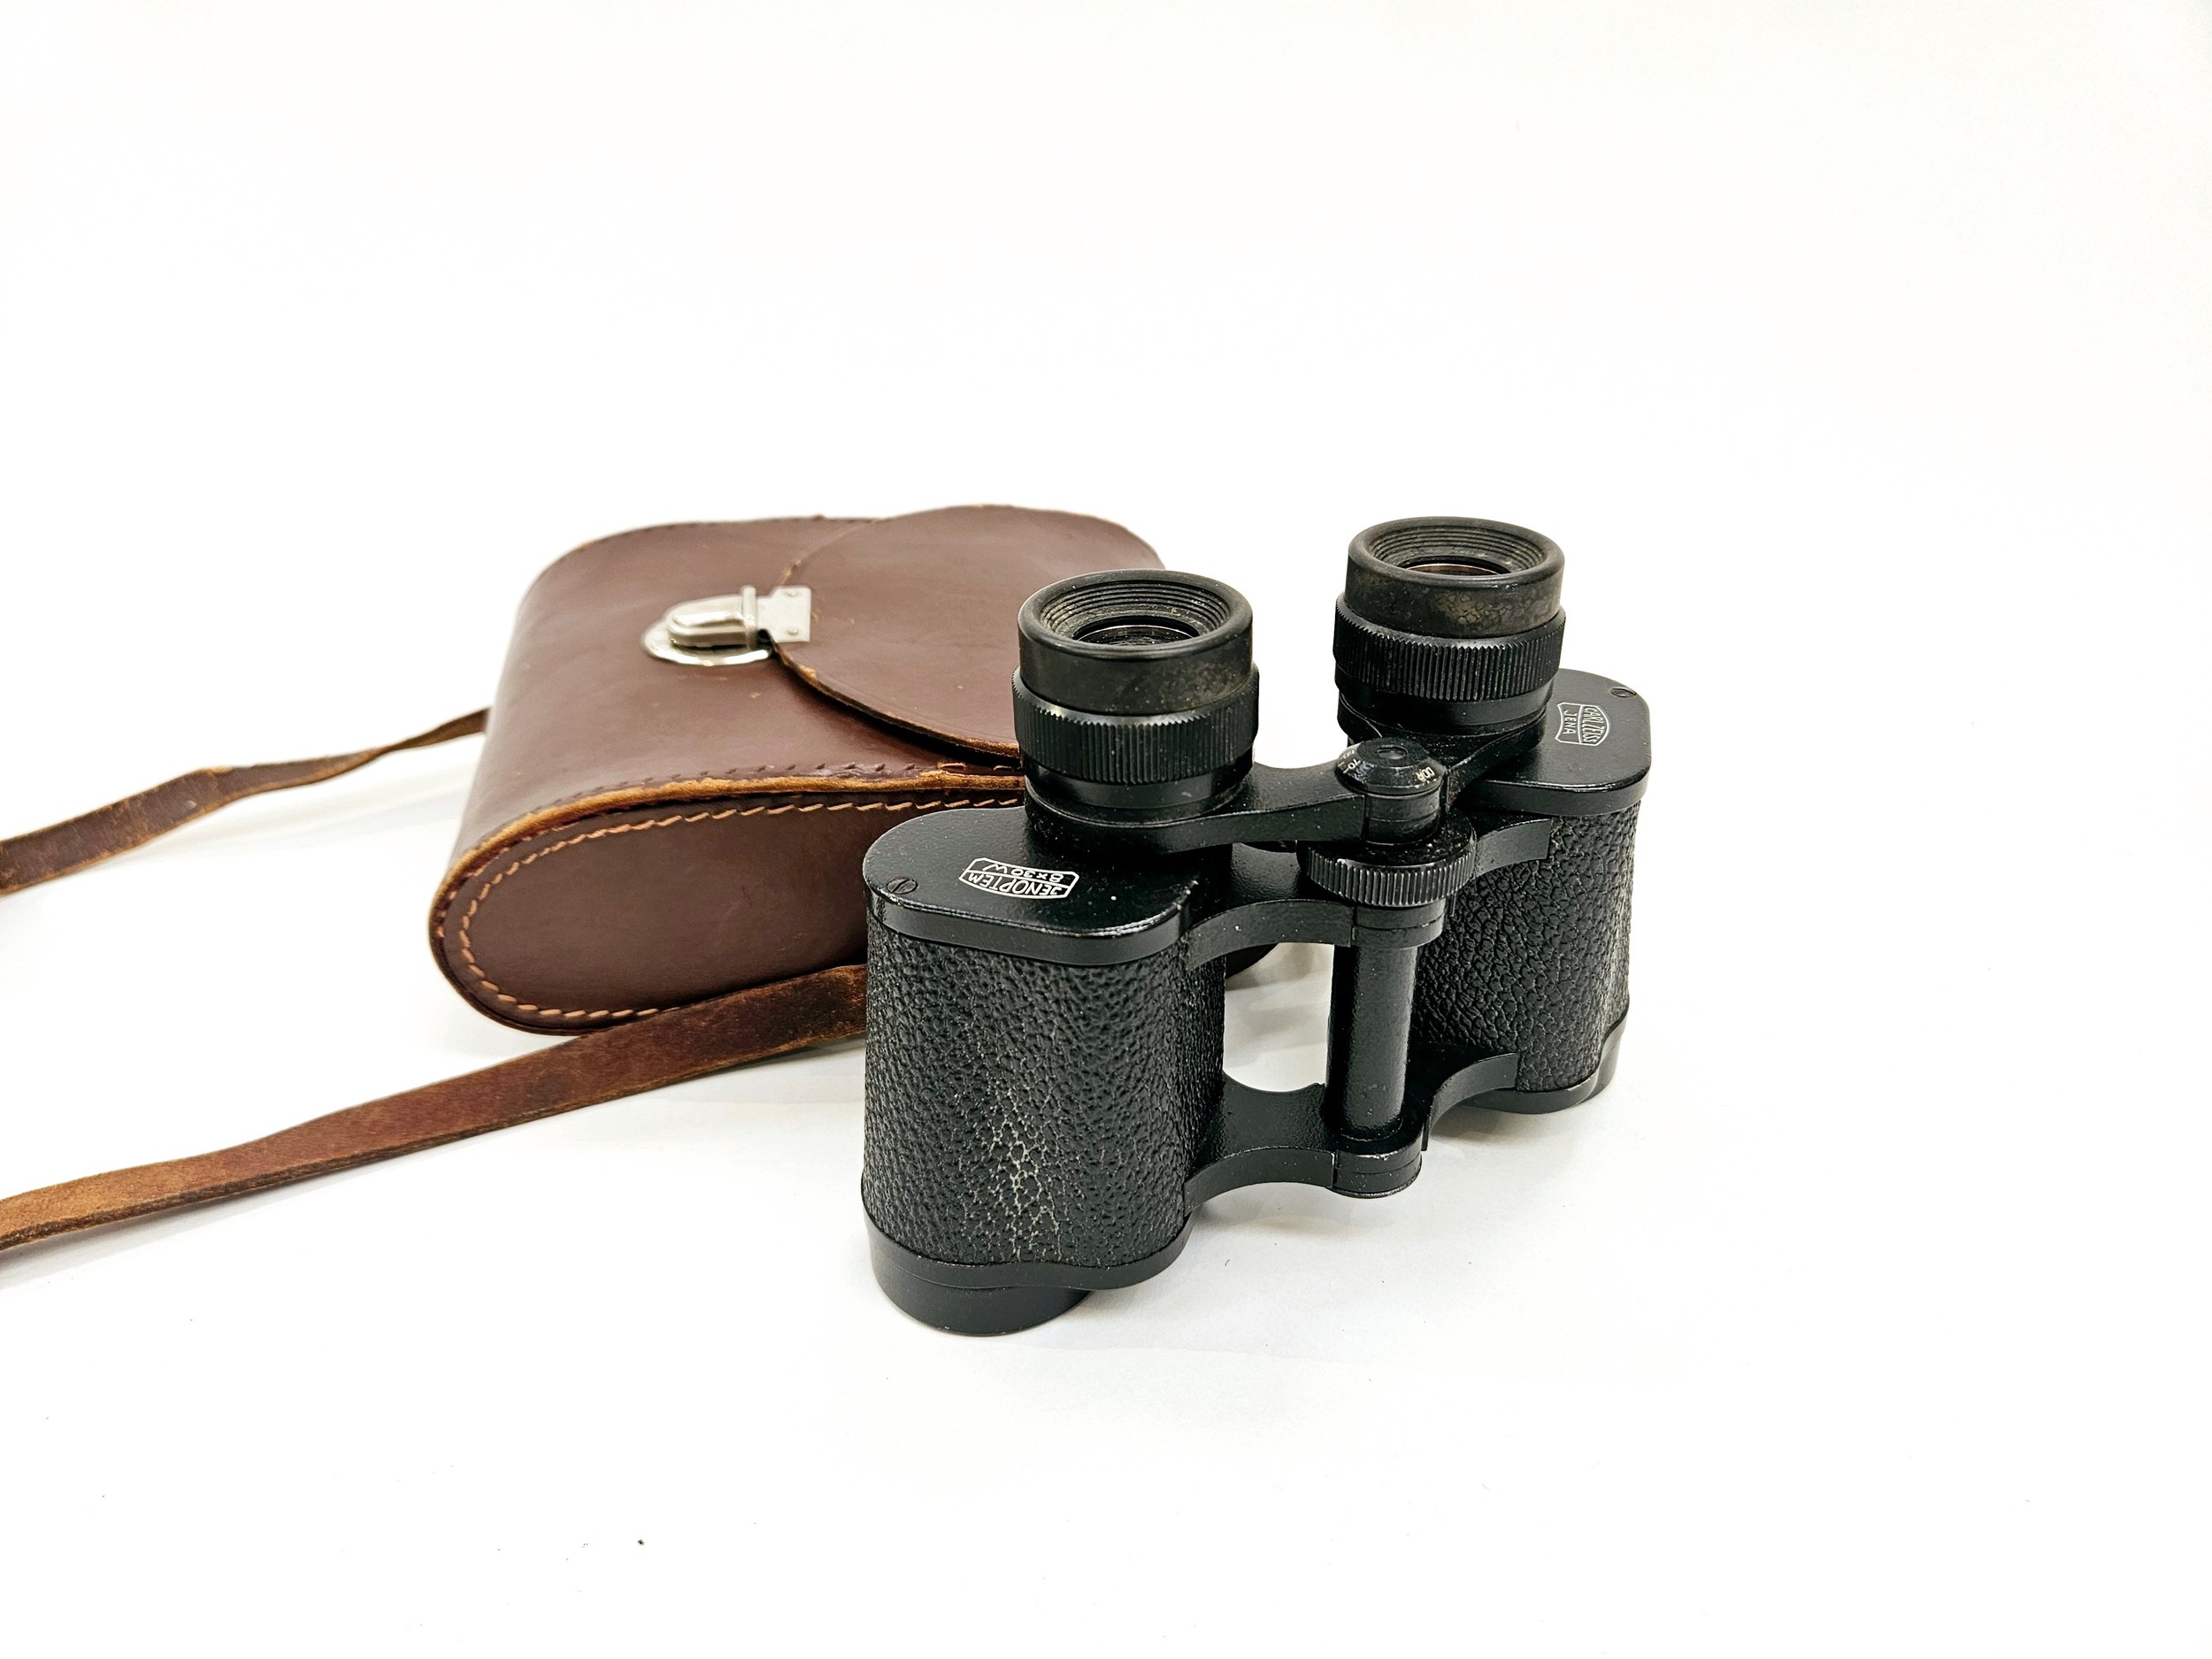 A pair of Carl Zeiss Jenoptem 8x30W binoculars with case